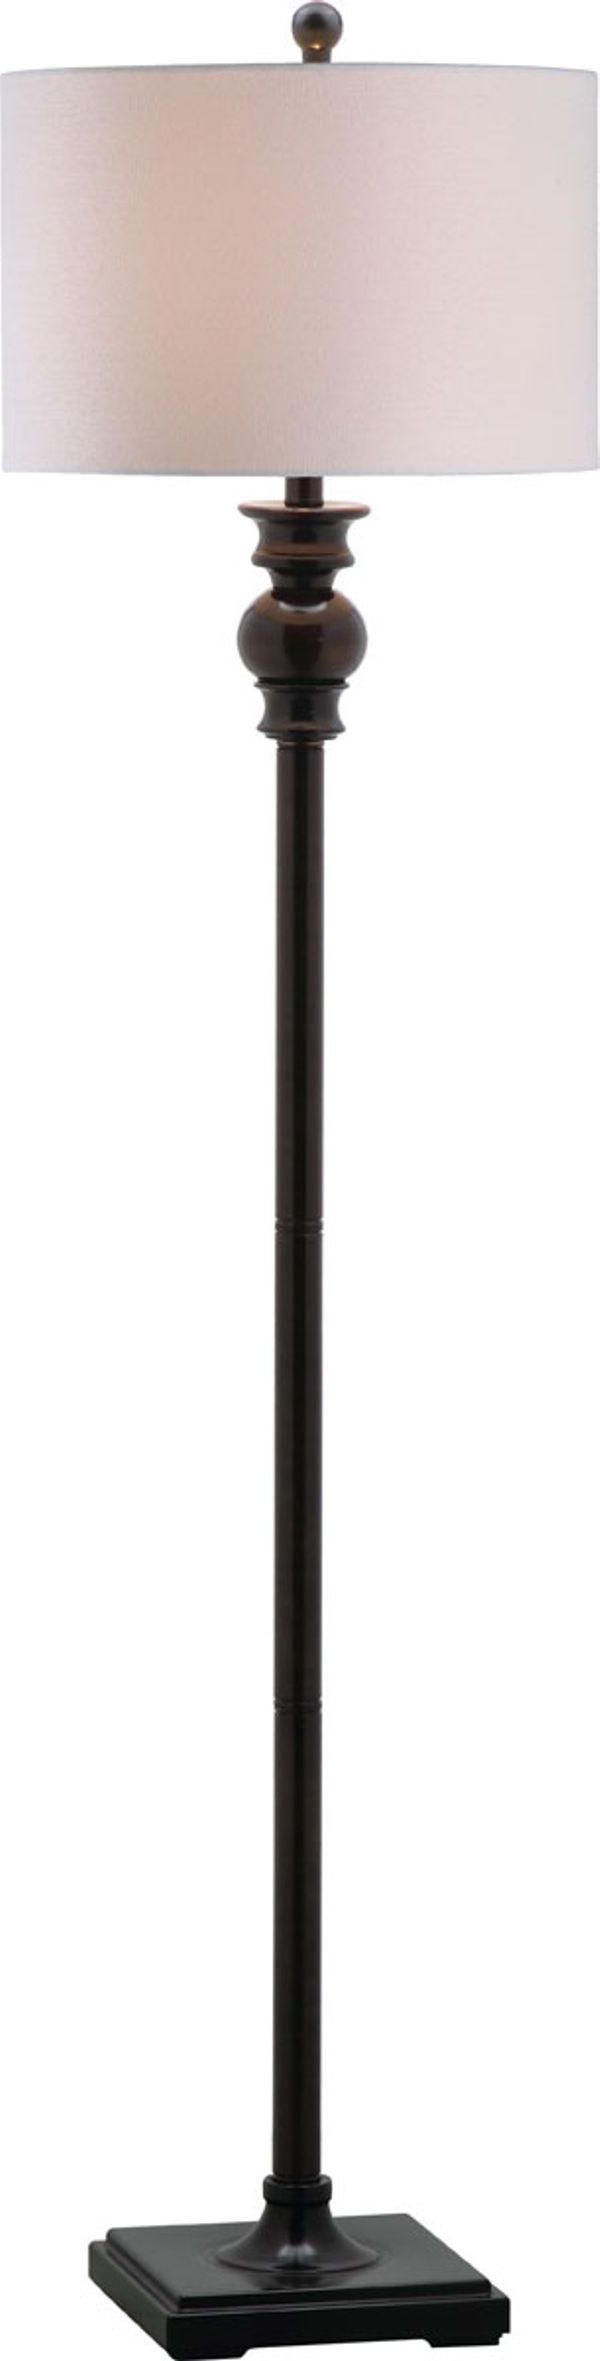 Alphie 61 Inch H Floor Lamp – Floor Lamps – Table And Floor Lamps – Safavieh At Moro Intended For 61 Inch Floor Lamps (Gallery 19 of 20)